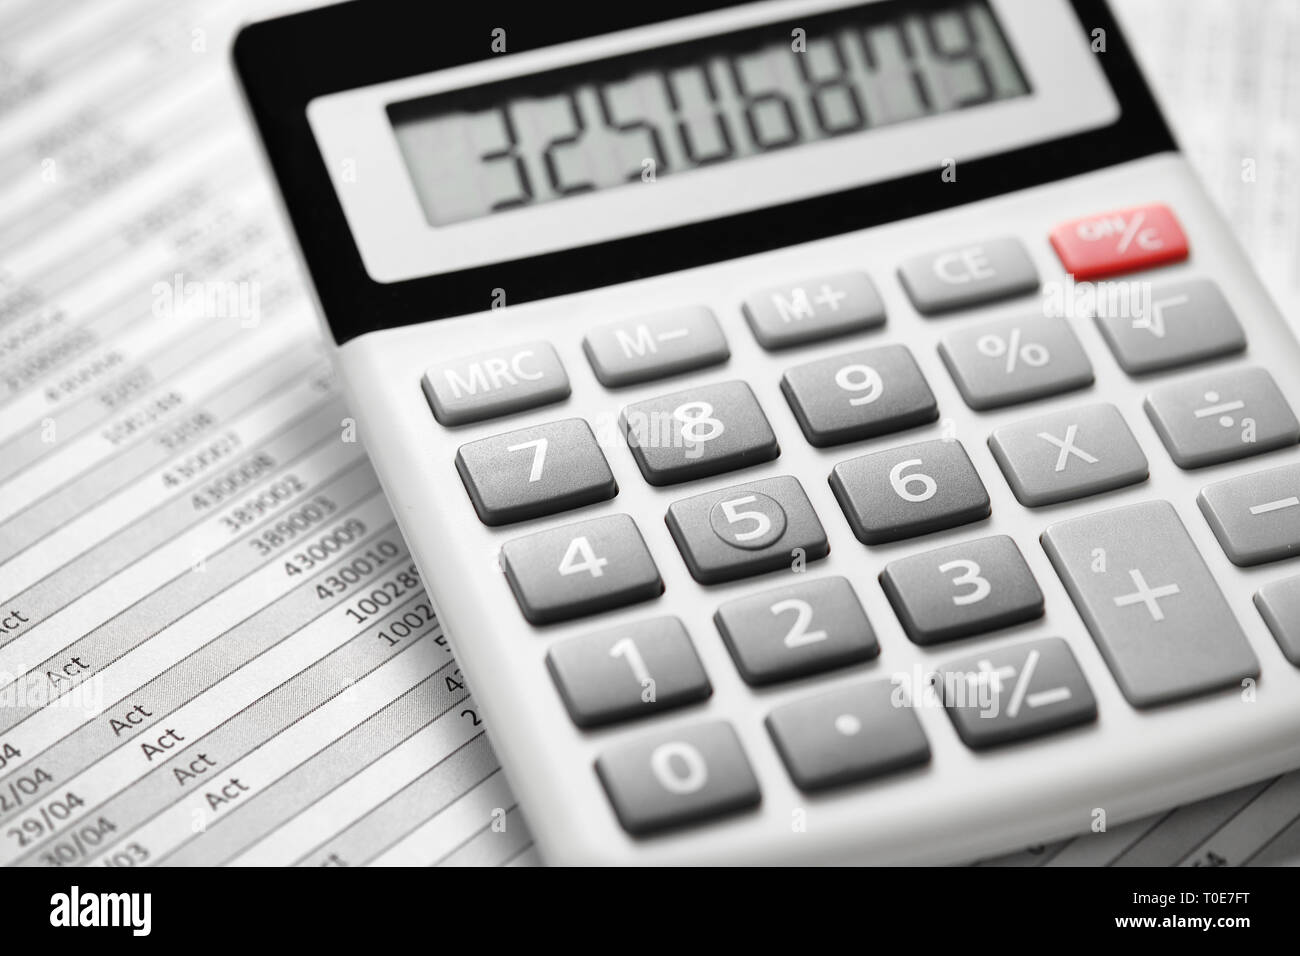 Calculator and reports closeup. Office supplies for working and calculating finance. Business financial accounting concept. Stock Photo